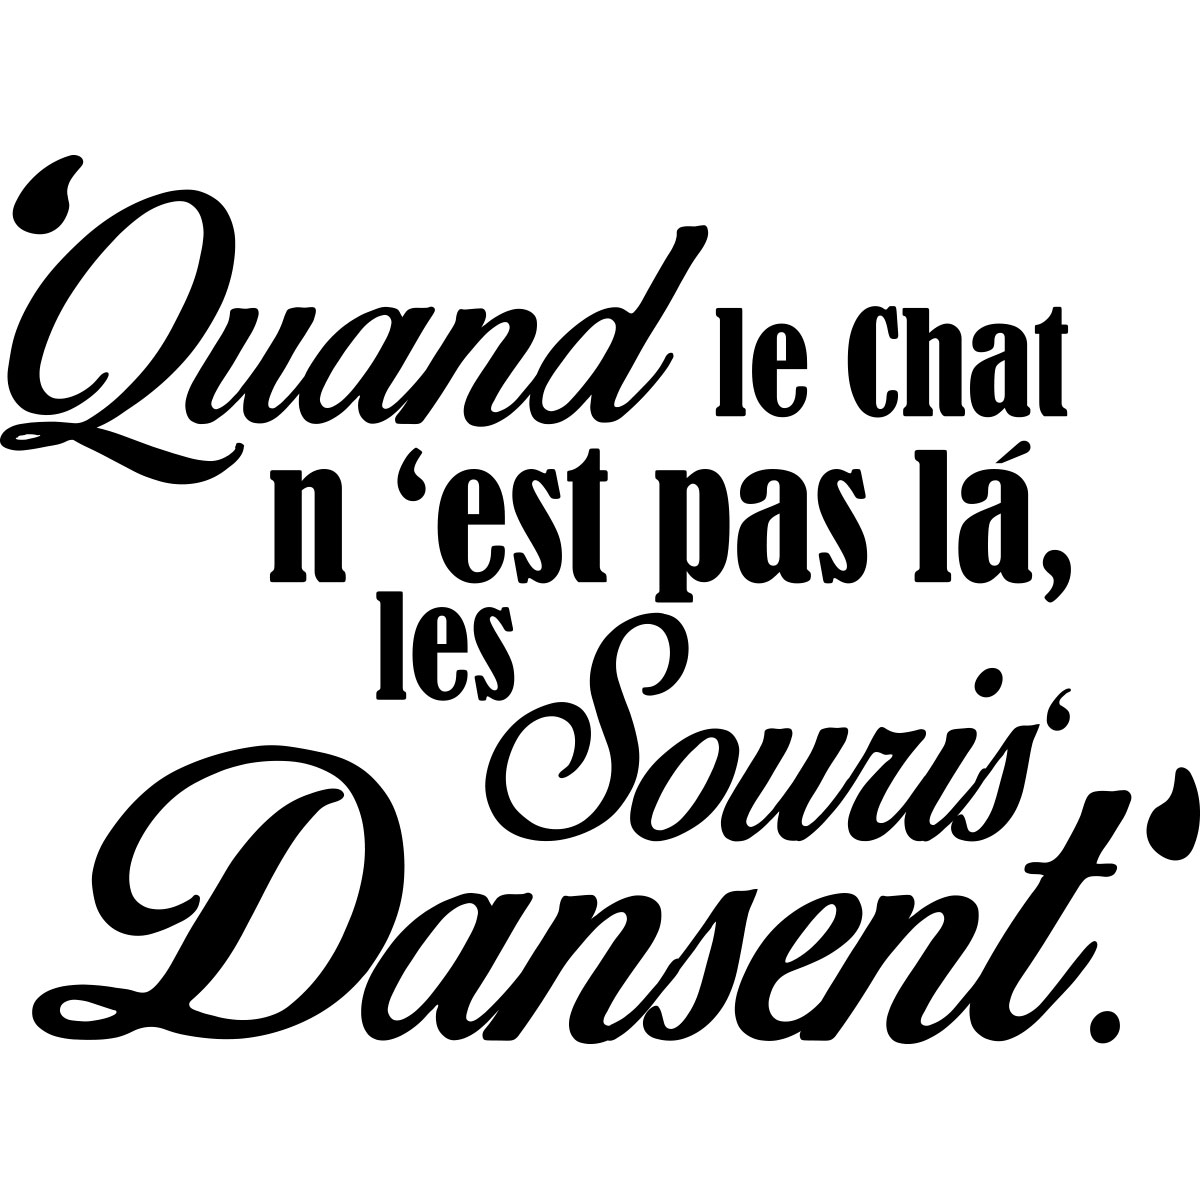 Wall Decal Quand Le Chat N Est Pas La Les Souris Dansent Wall Decal Quote Wall Stickers French Ambiance Sticker